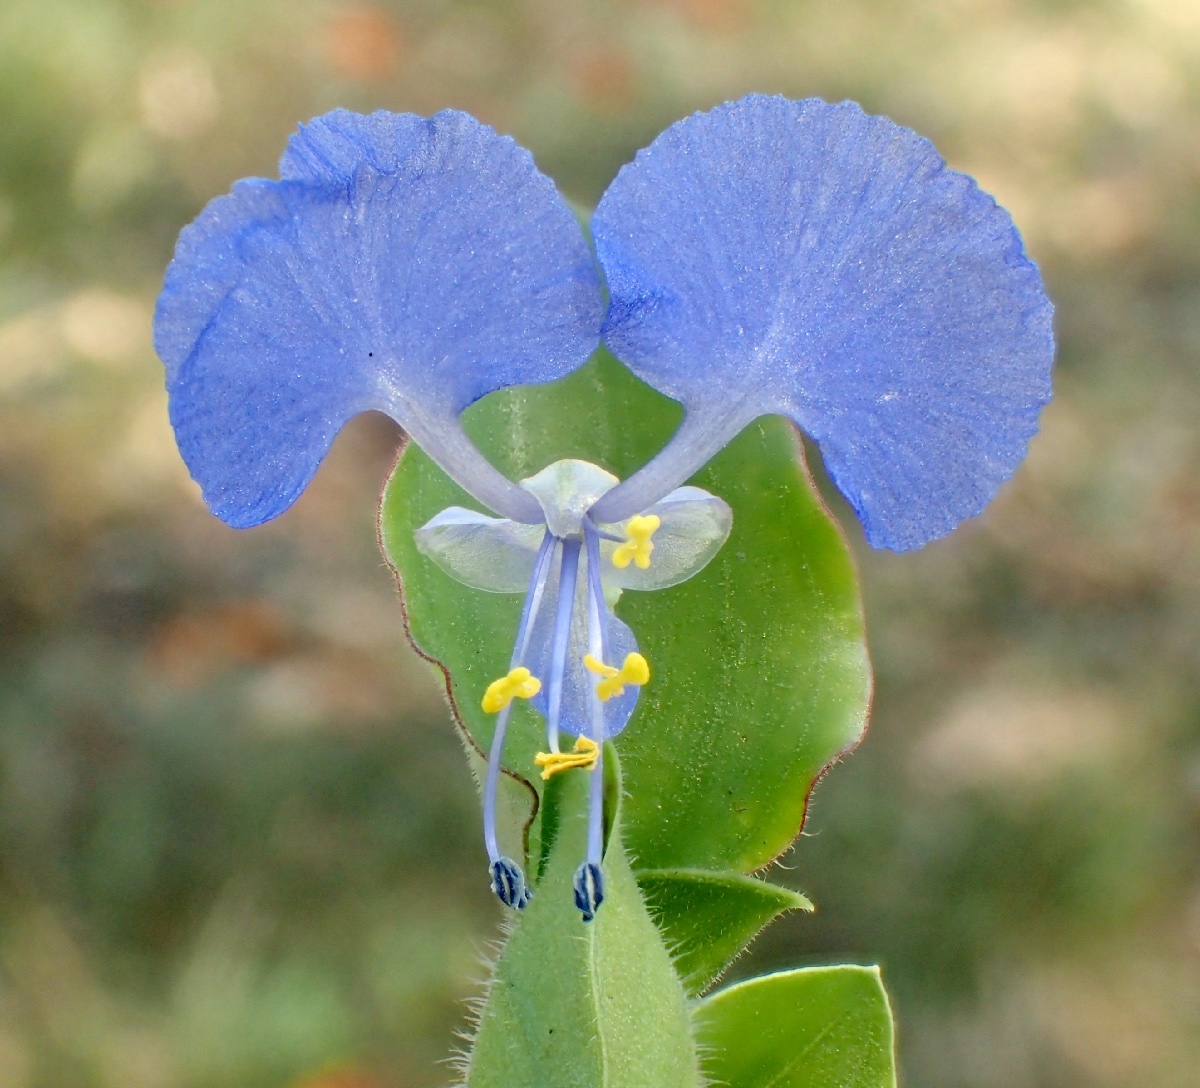 Commelina benghalensis